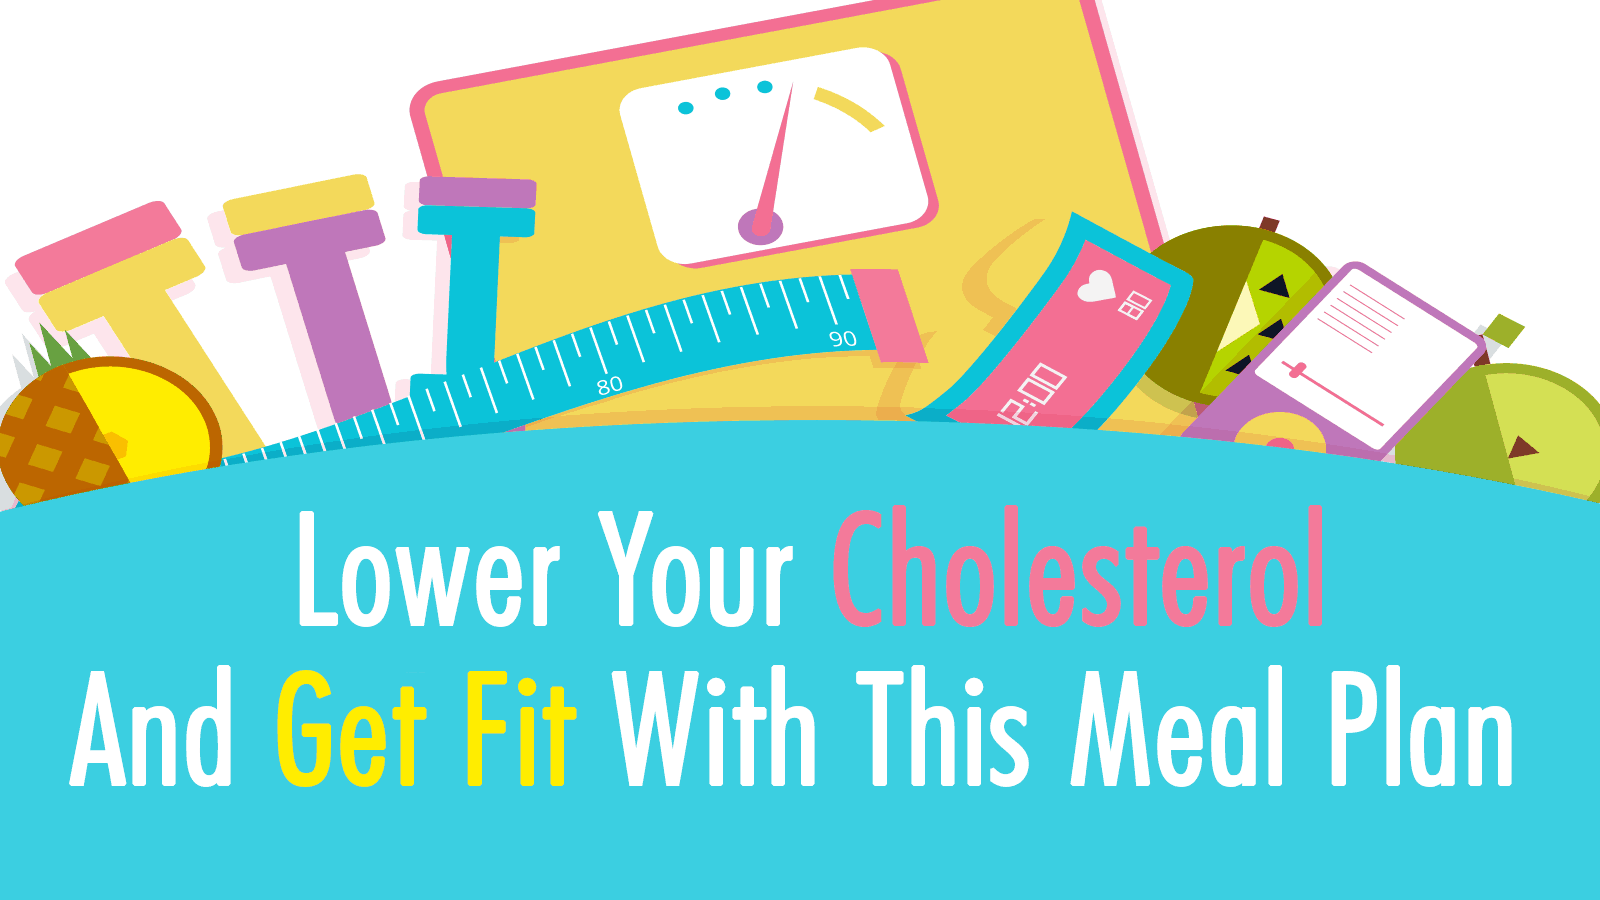 Nuts to lower your cholesterol